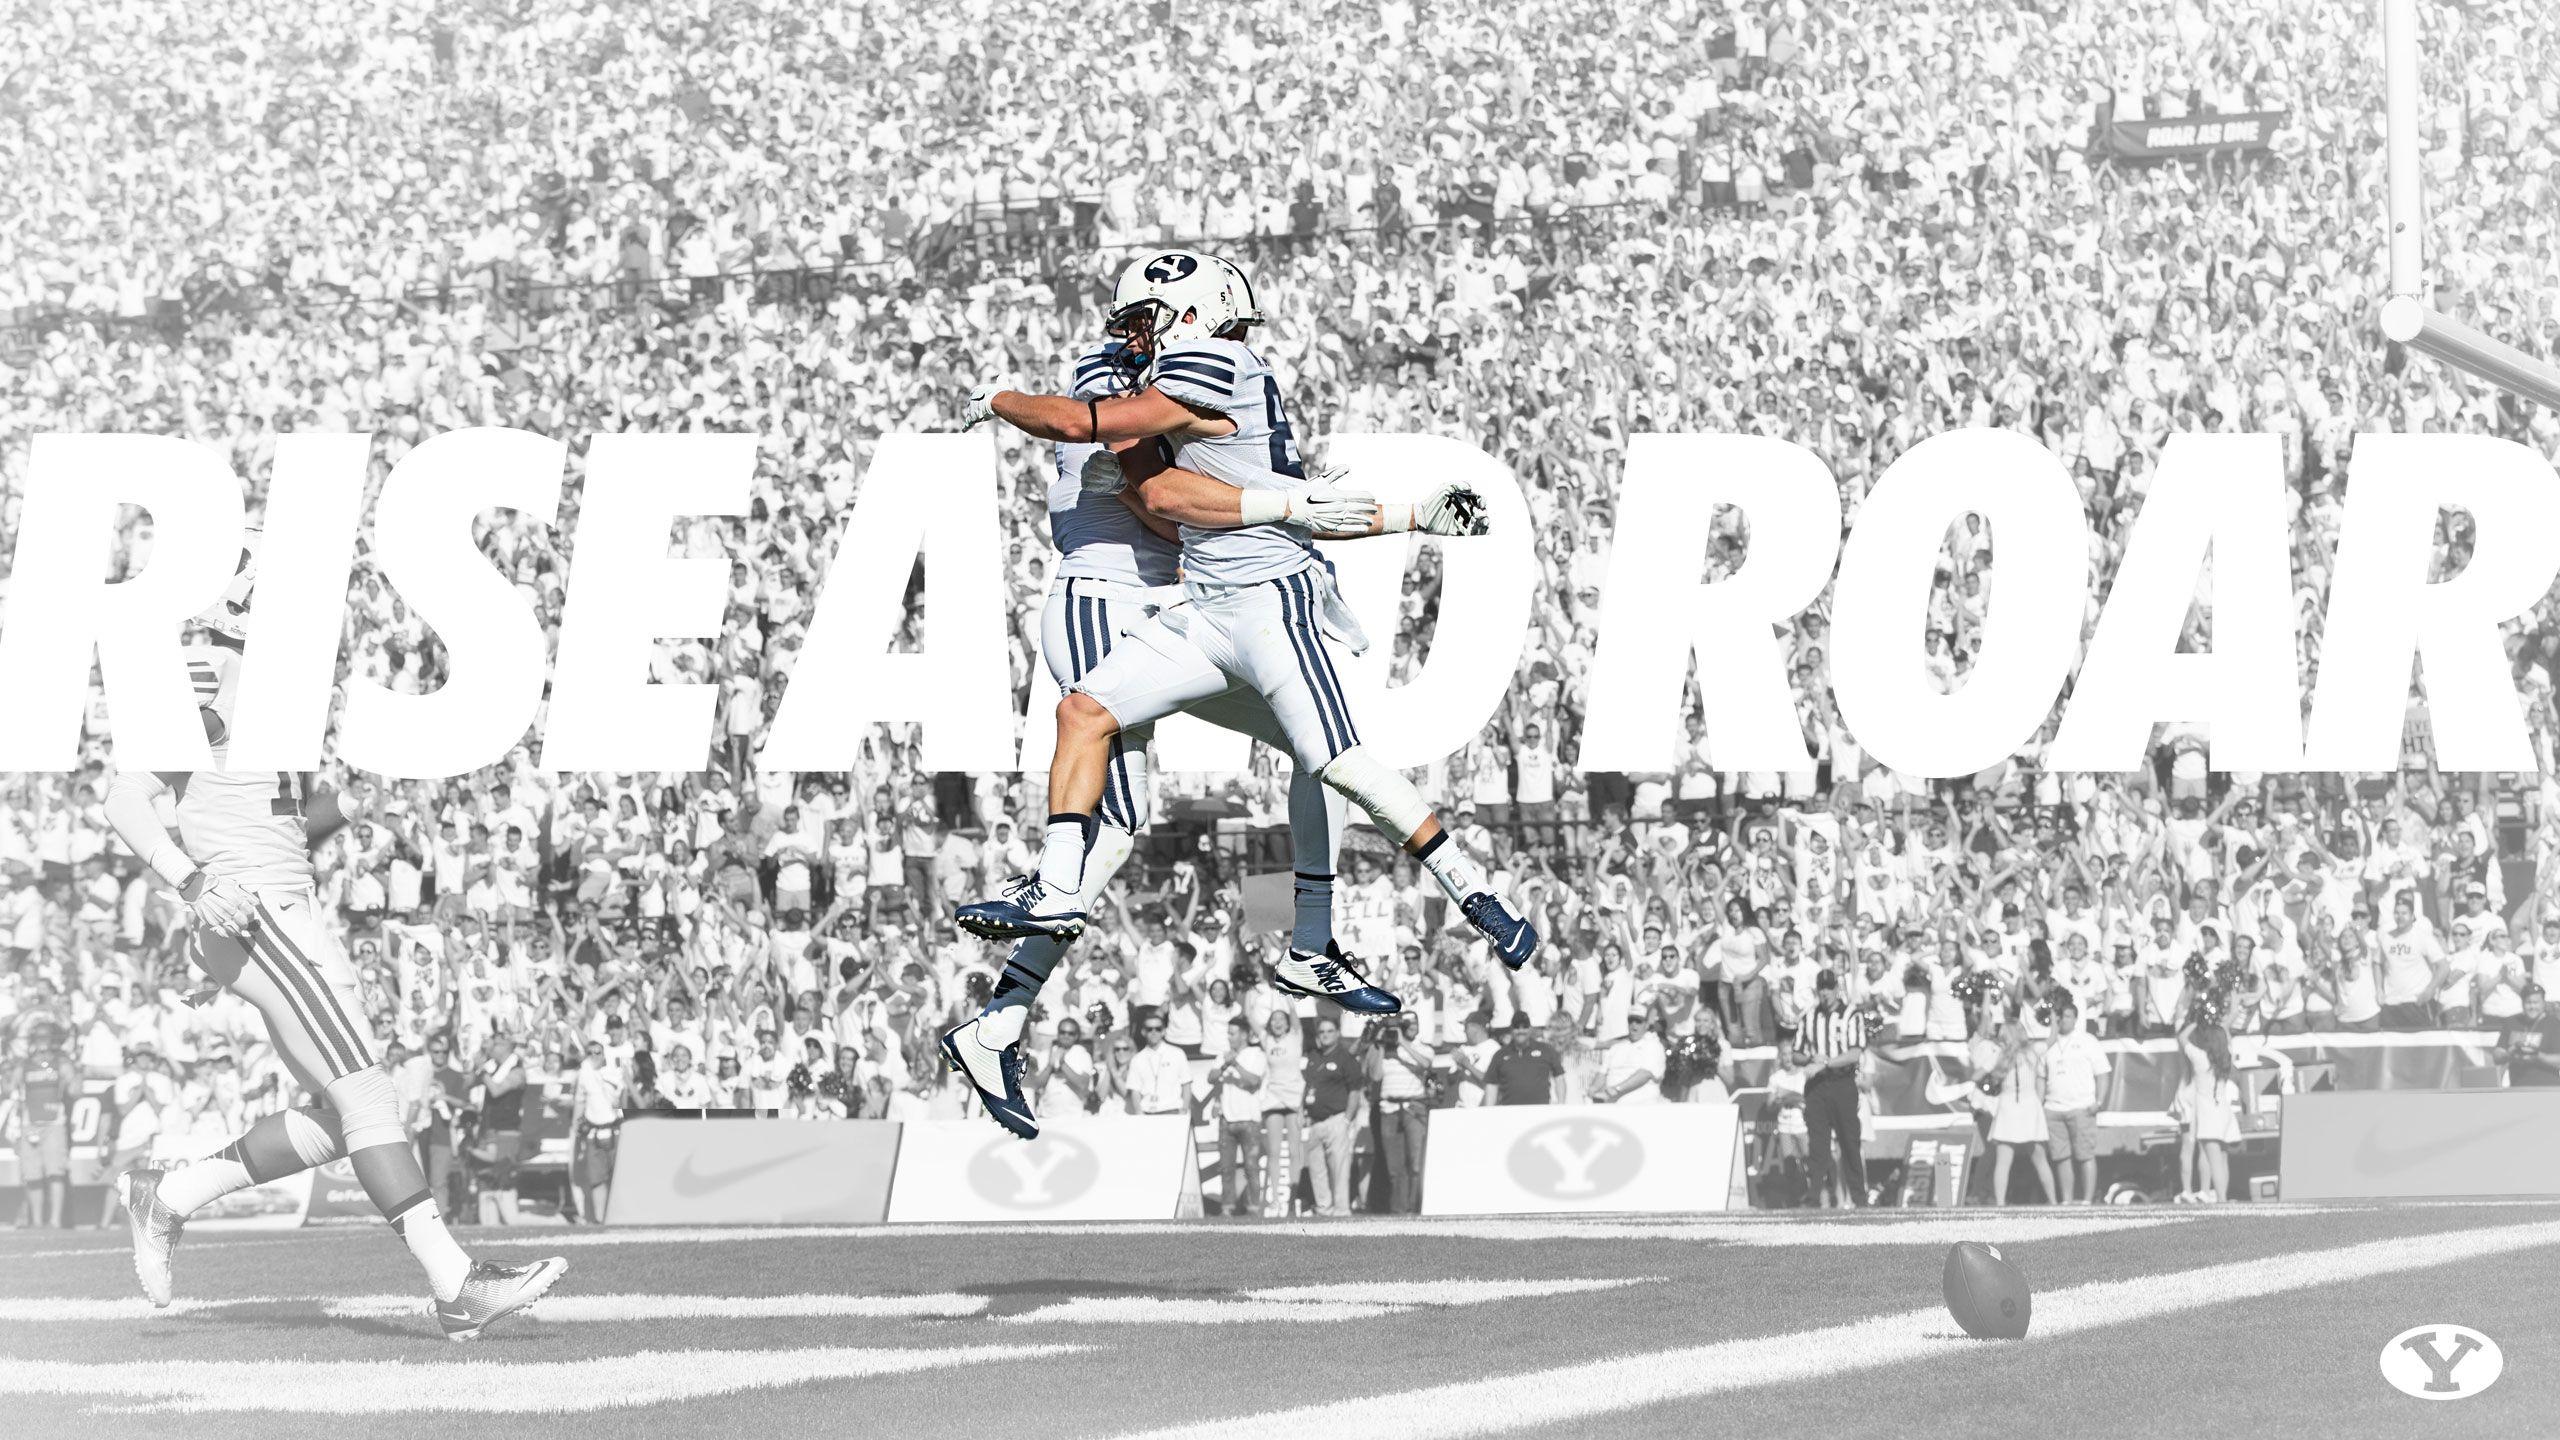 2016 Byu Football Schedule Backgrounds - Wallpaper Cave